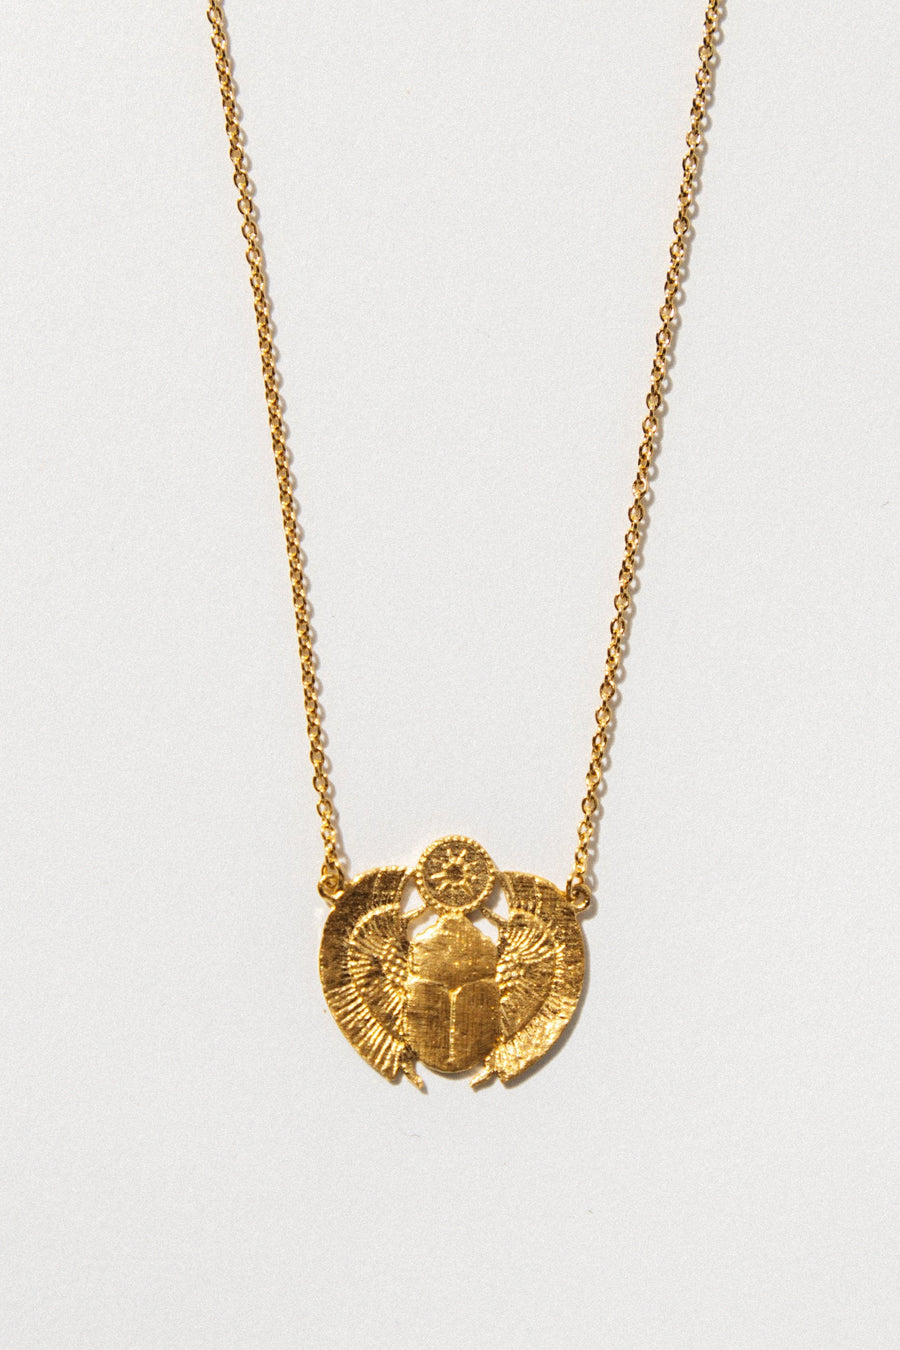 Temple of the Sun Jewelry Gold Scarab Necklace